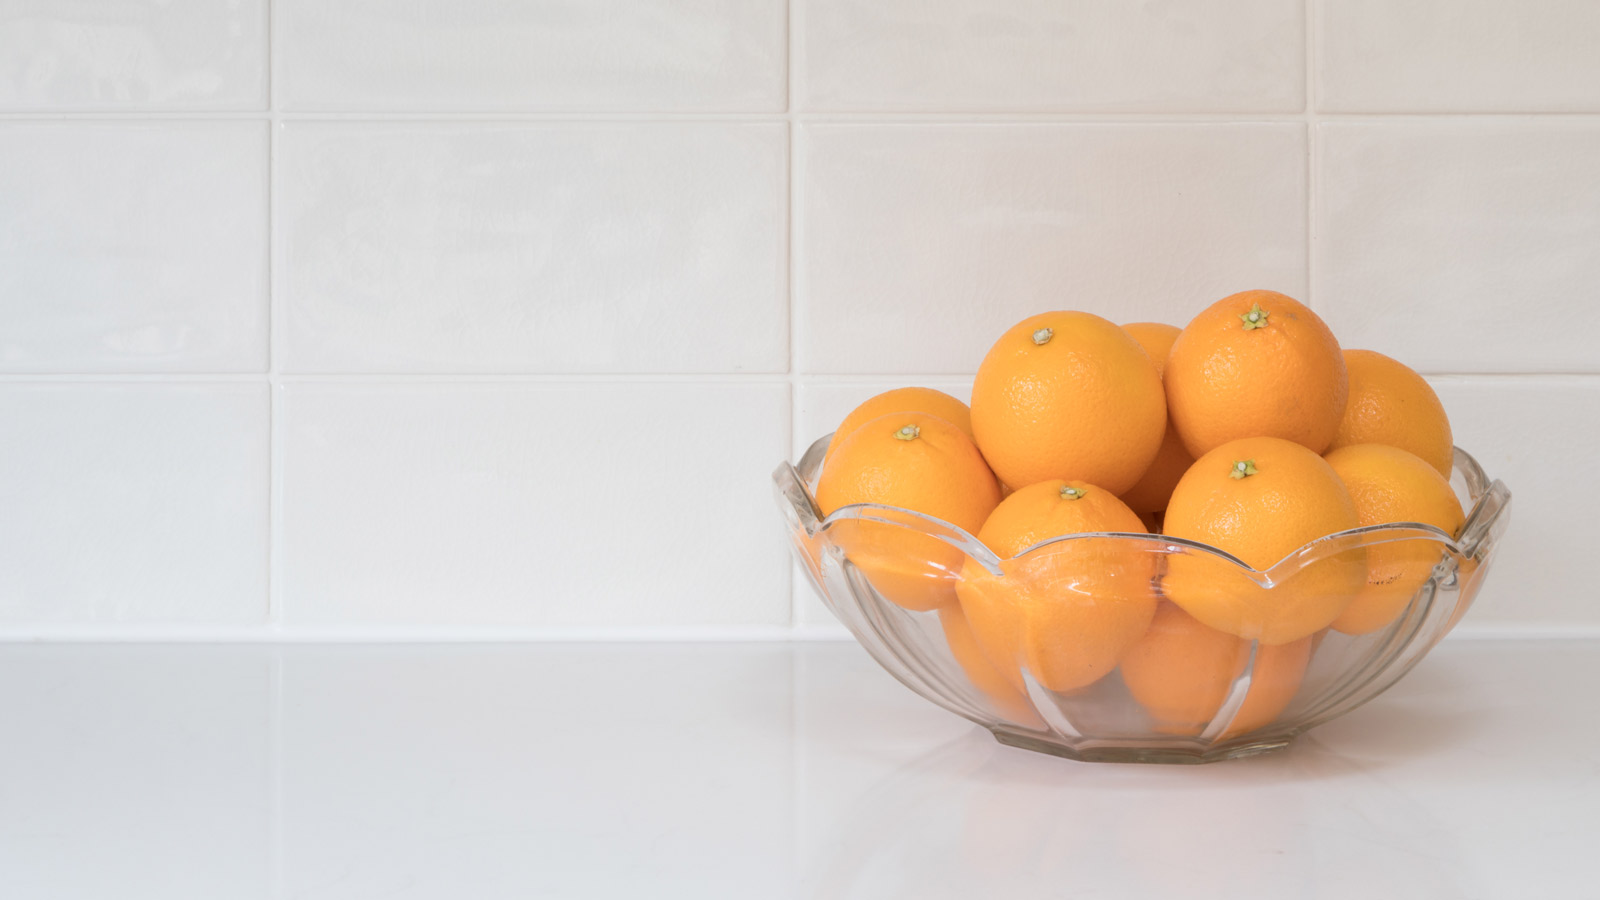 A bowl of oranges on a kitchen worktop ready for clove orange pomanders